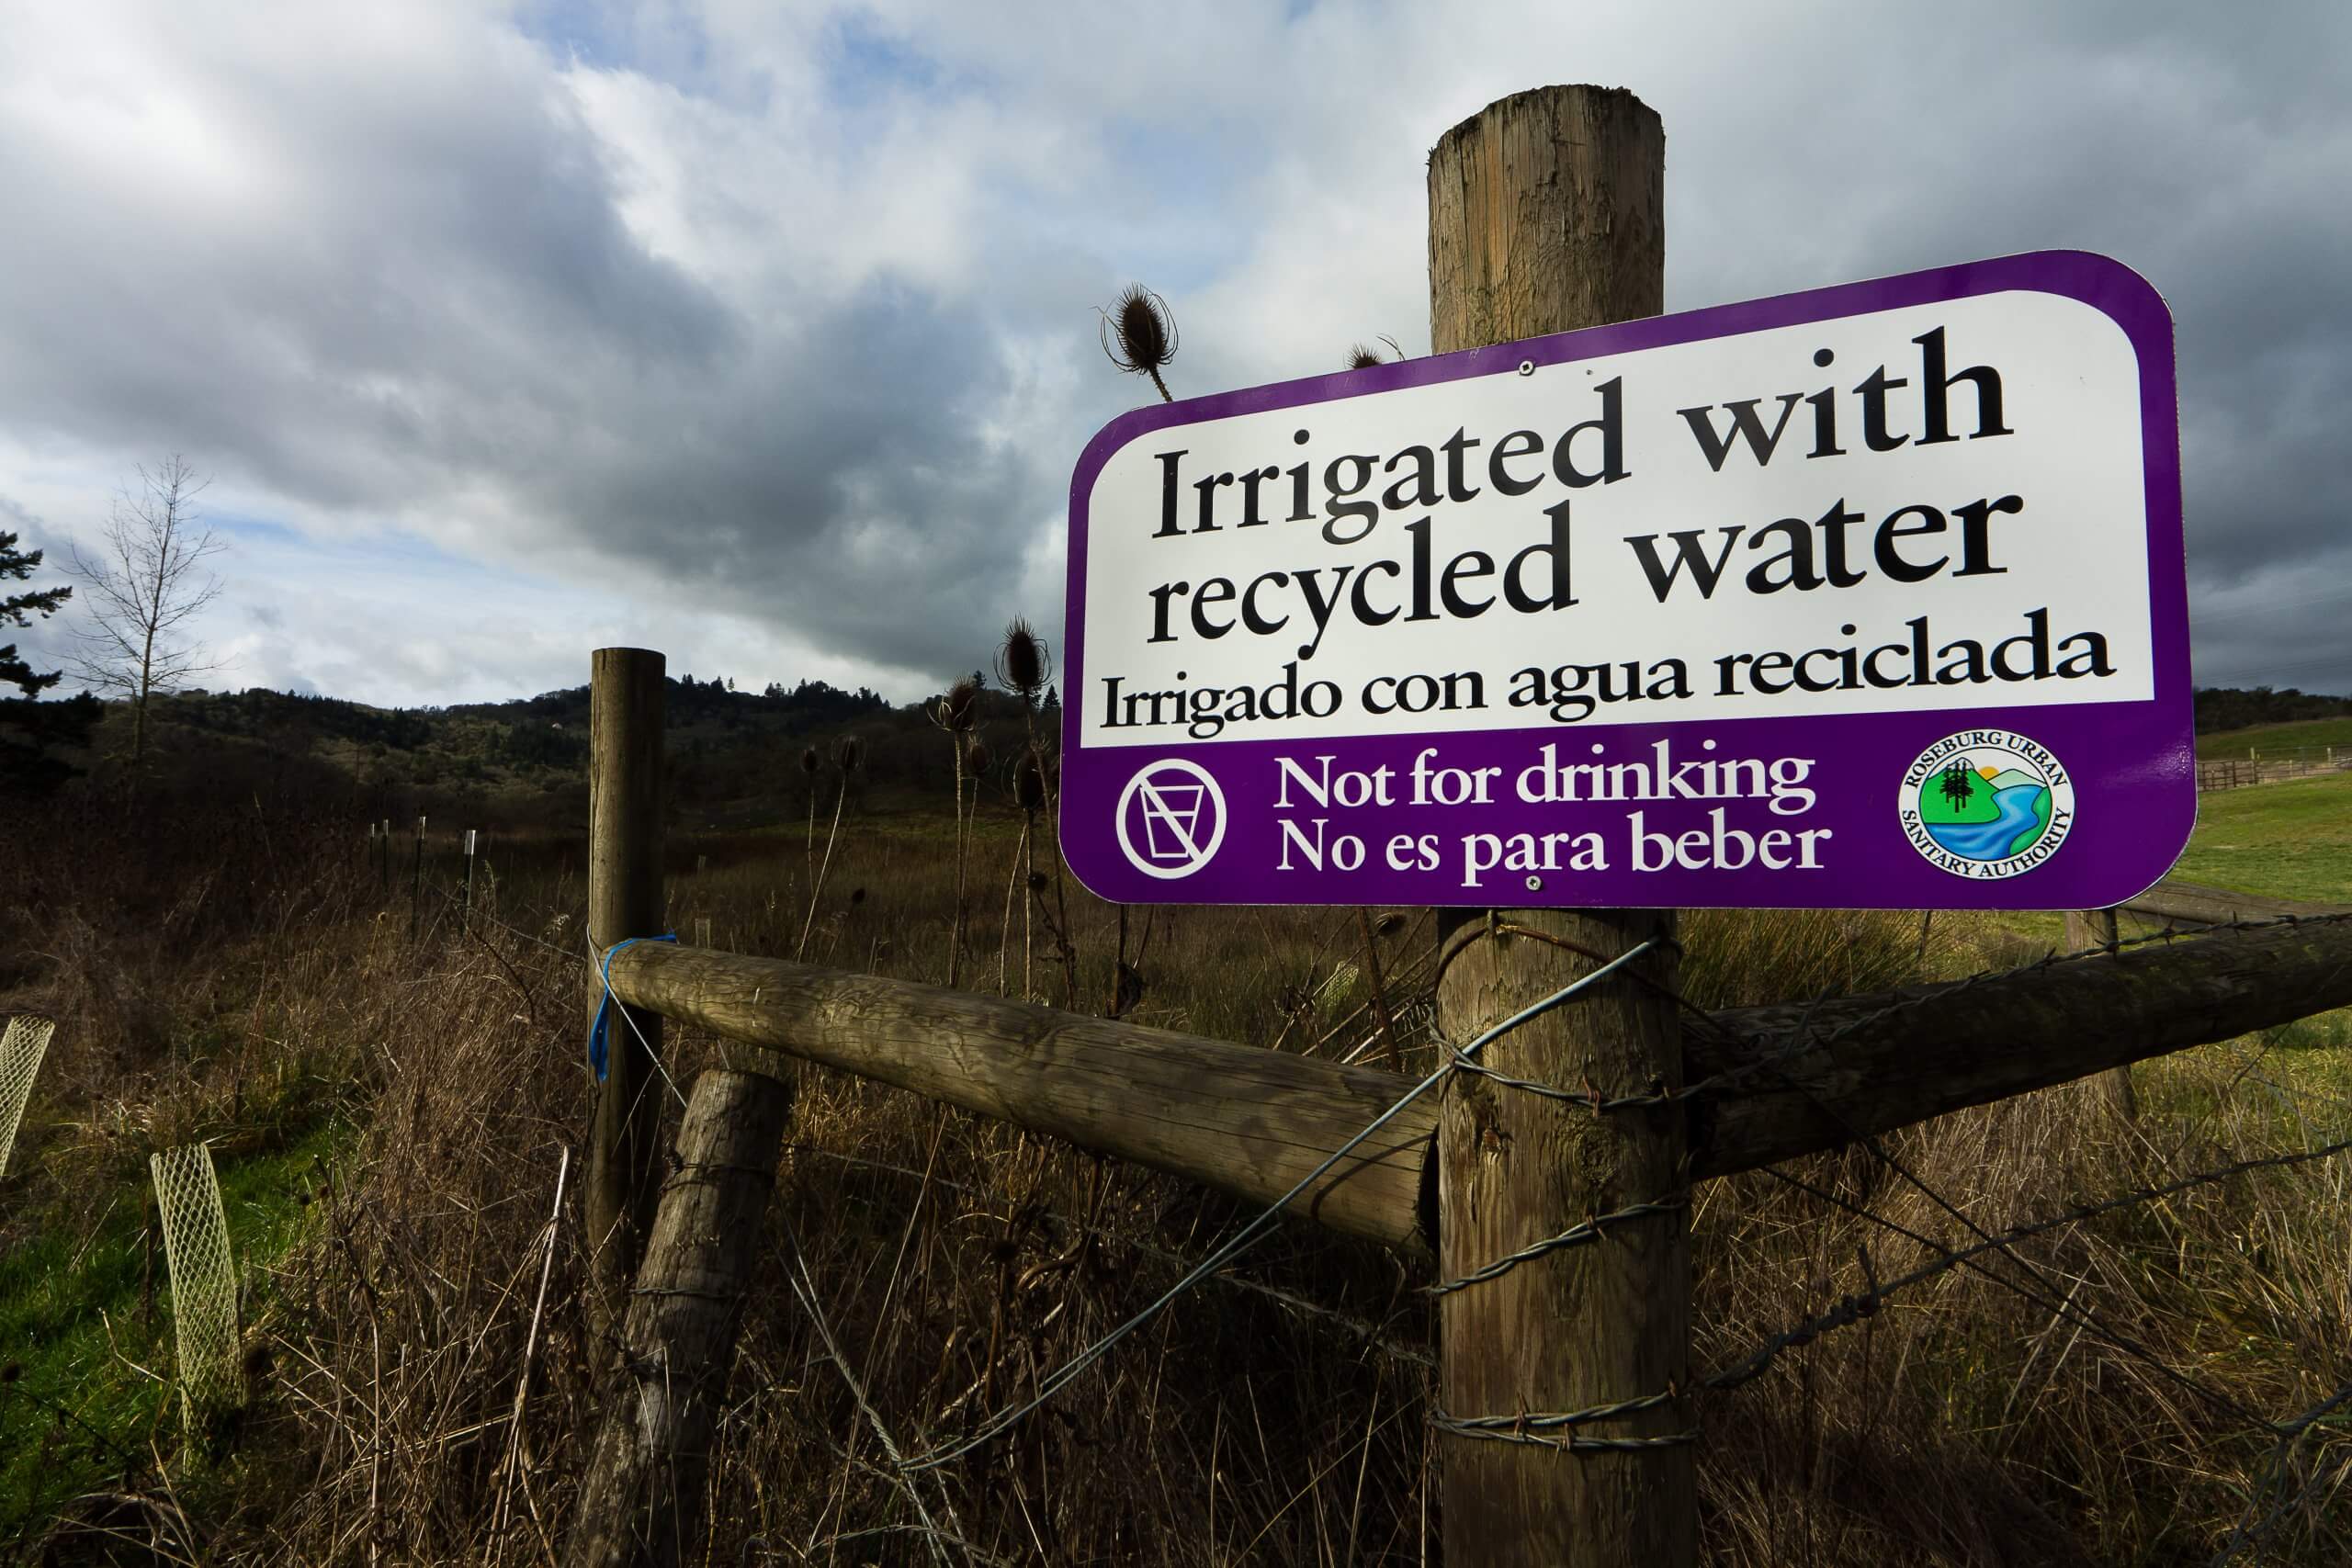 Sign on fence post reading, "Irrigated with recycled water".